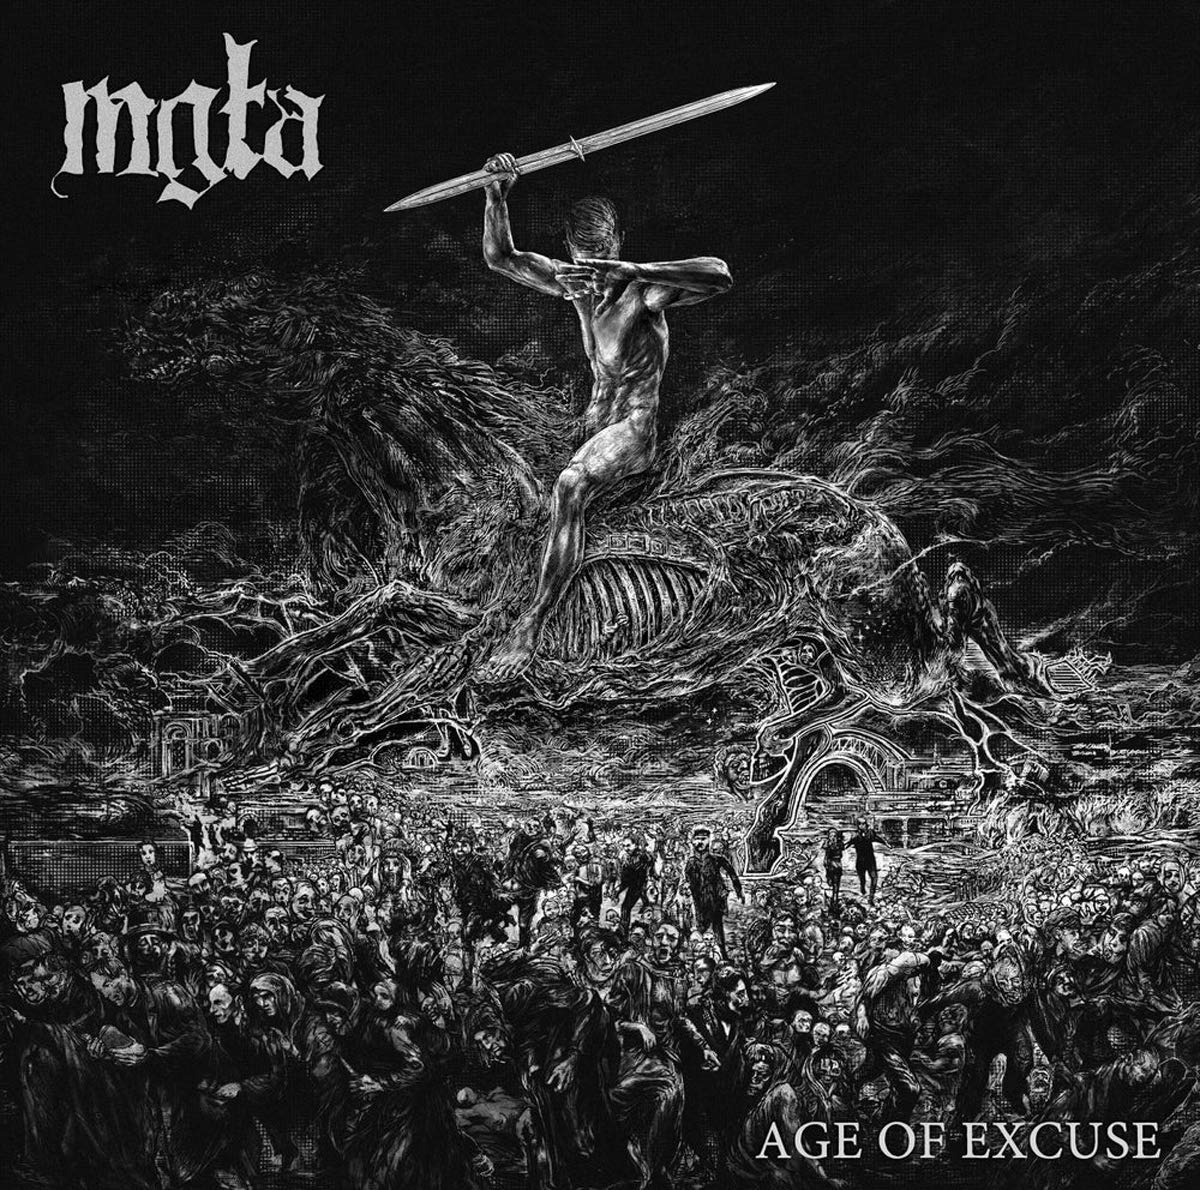 Age Of Excuse - Mgla music collectible [Barcode 0200000081157] - Main Image 1